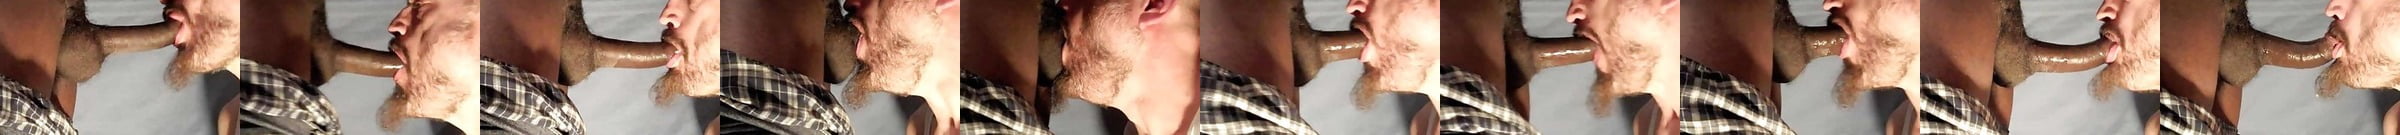 xvideos gay first time sucking